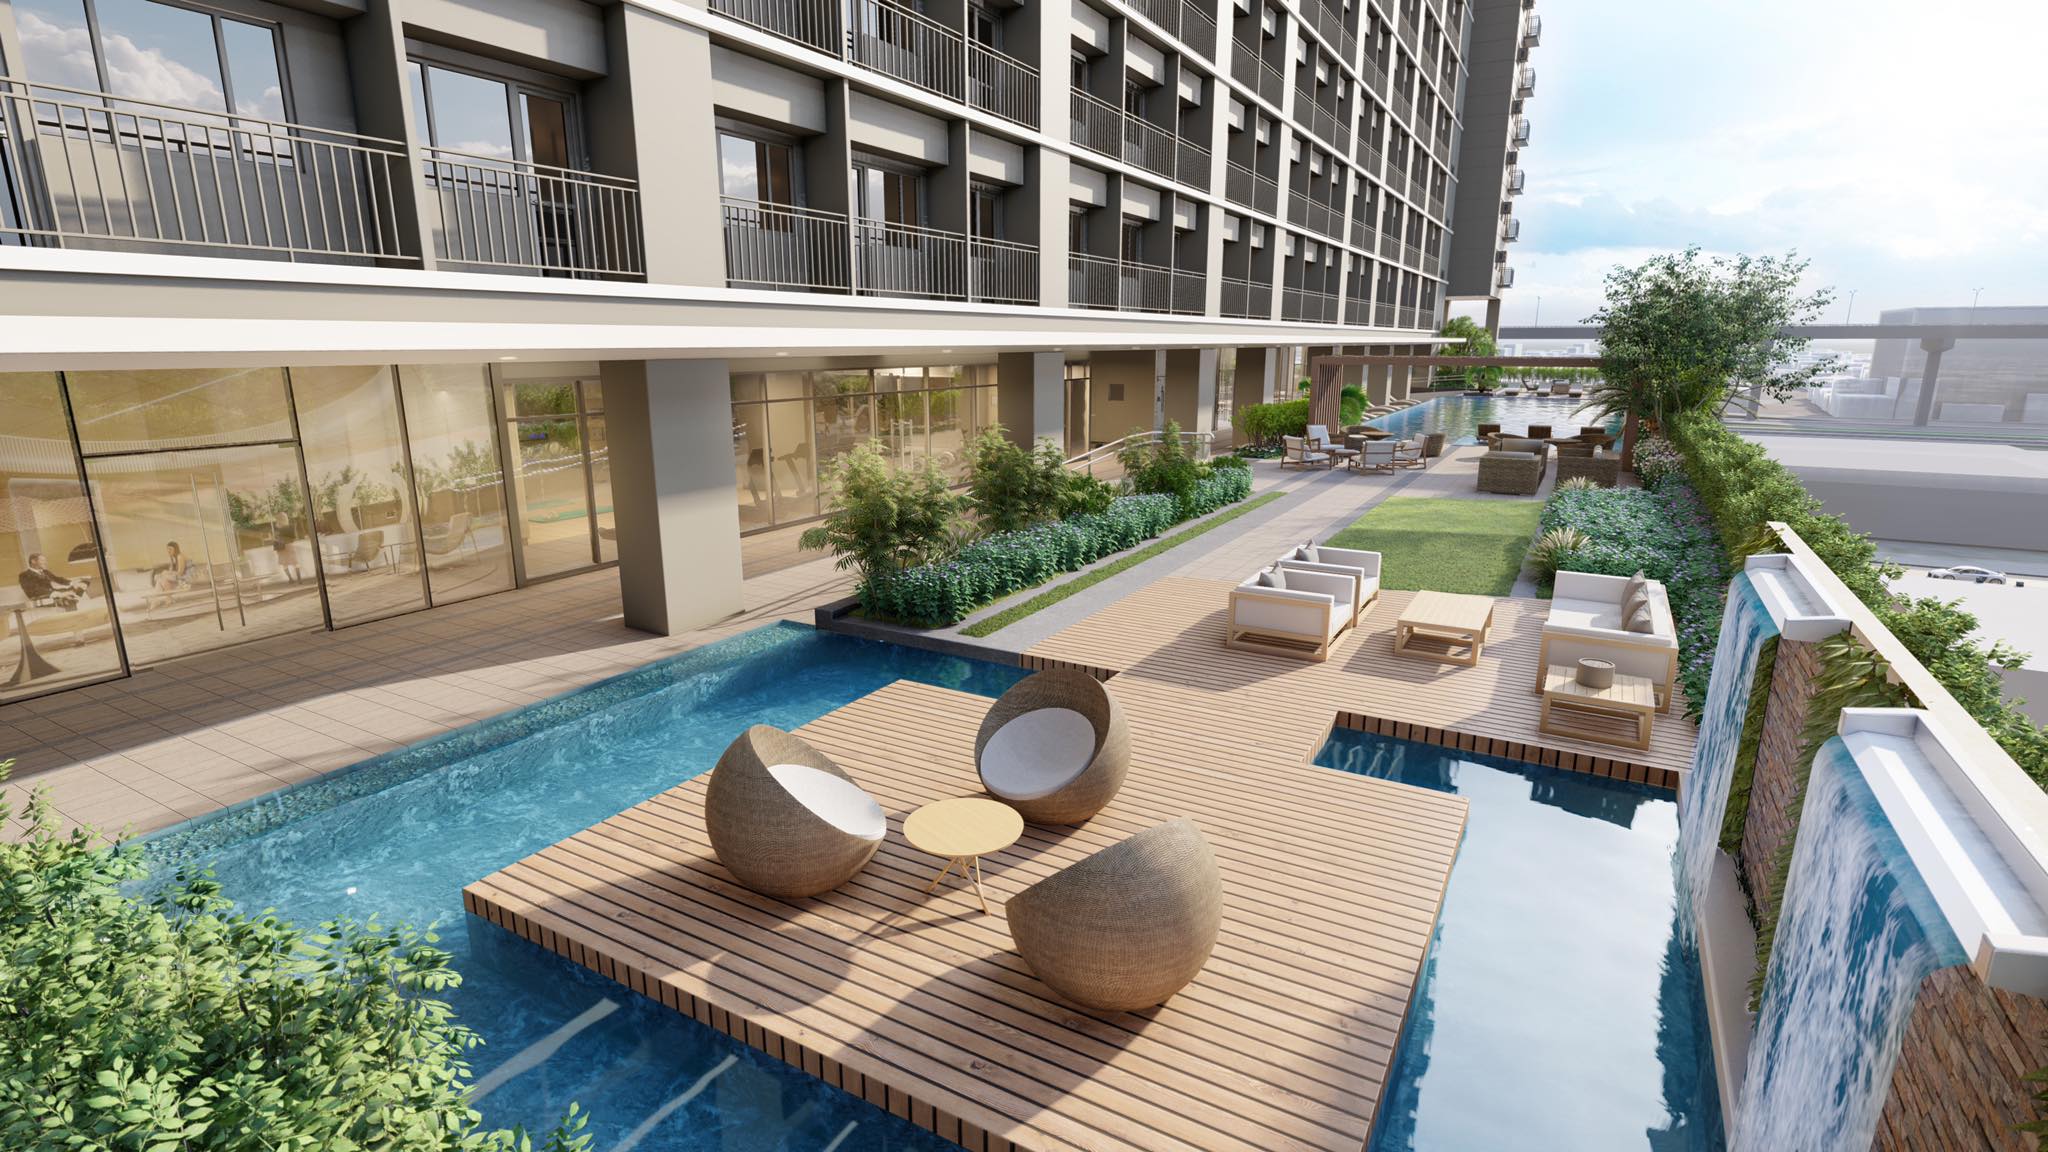 SMDC Mint Residences: Living closer to nature